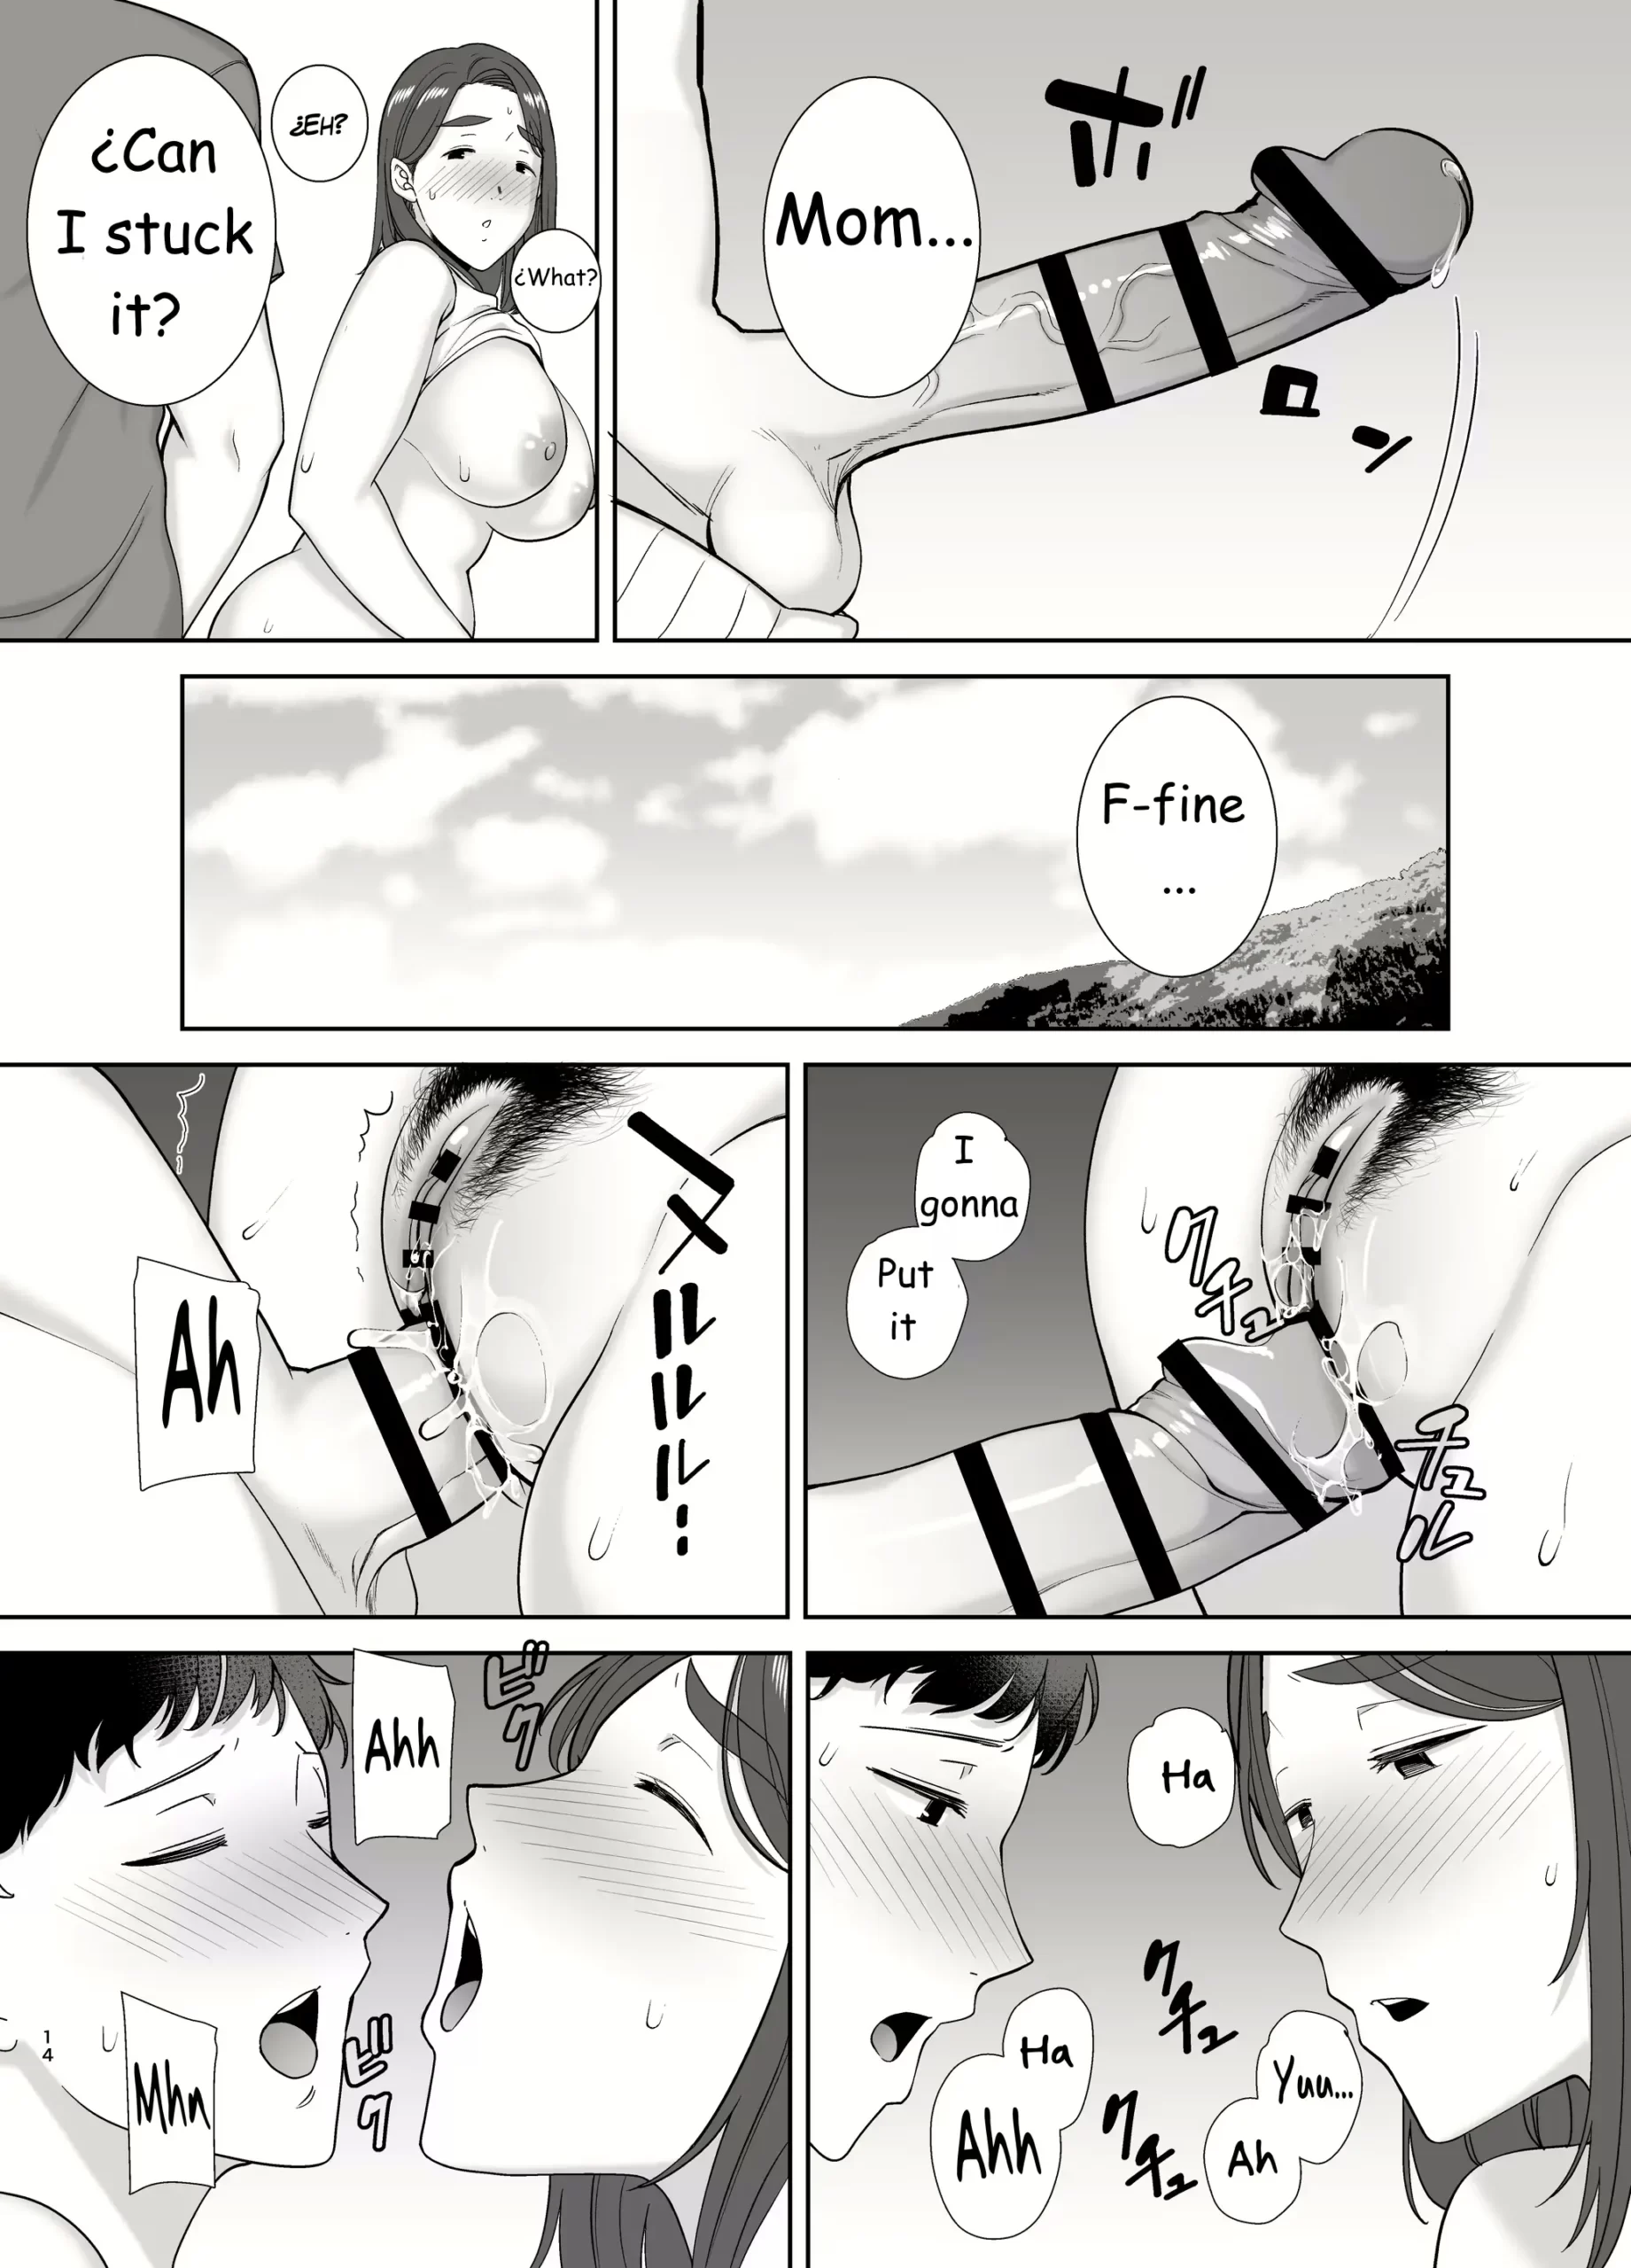 Incest hentai comics - I fell in love with my mother and now I want to fuck her 5